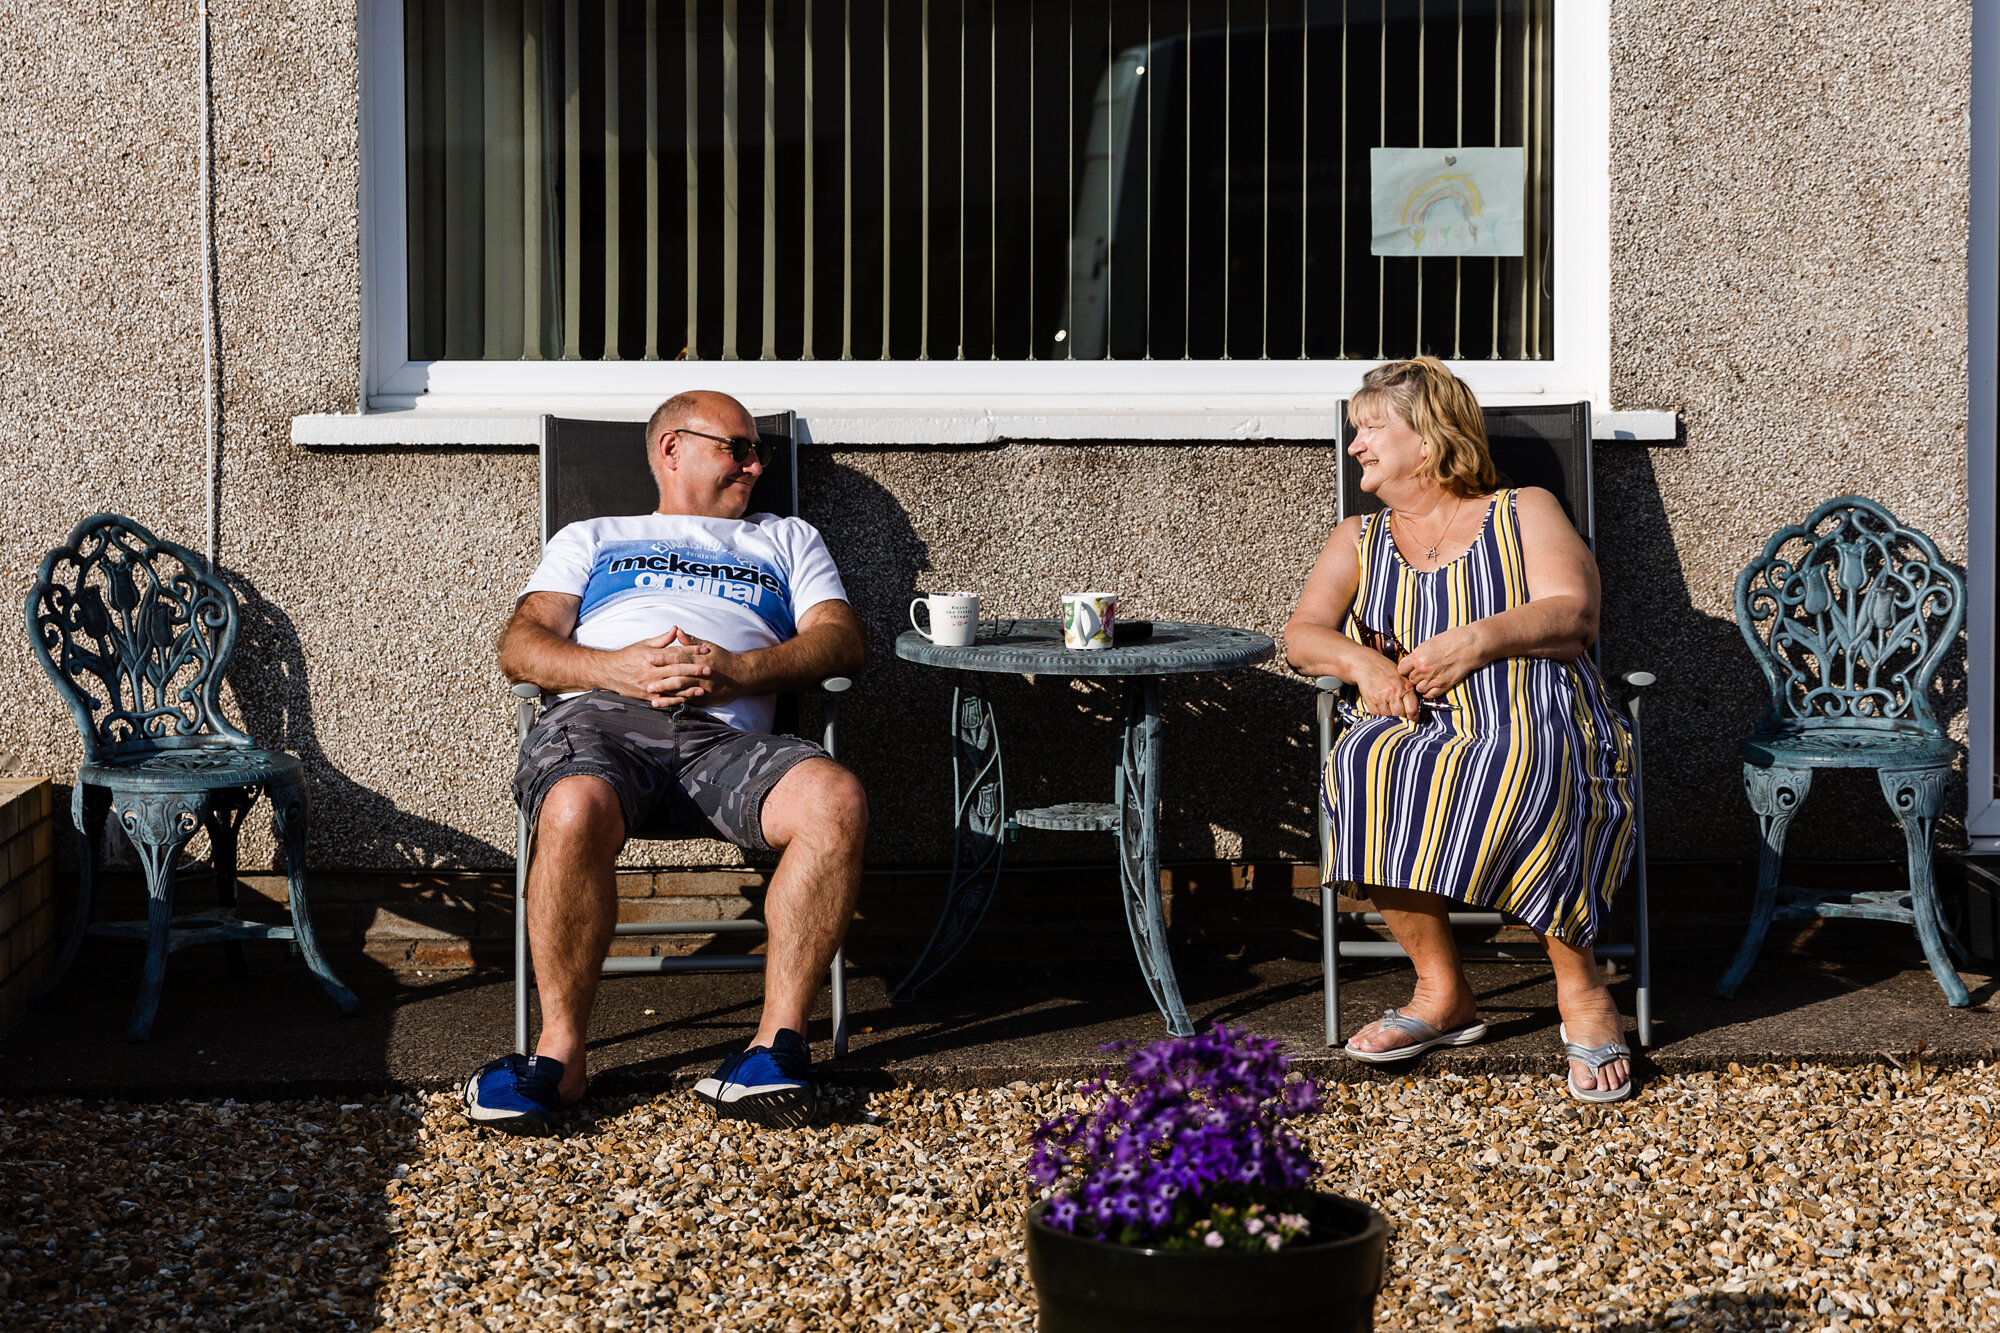 sunshine doorstep pictures in caerphilly, south wales